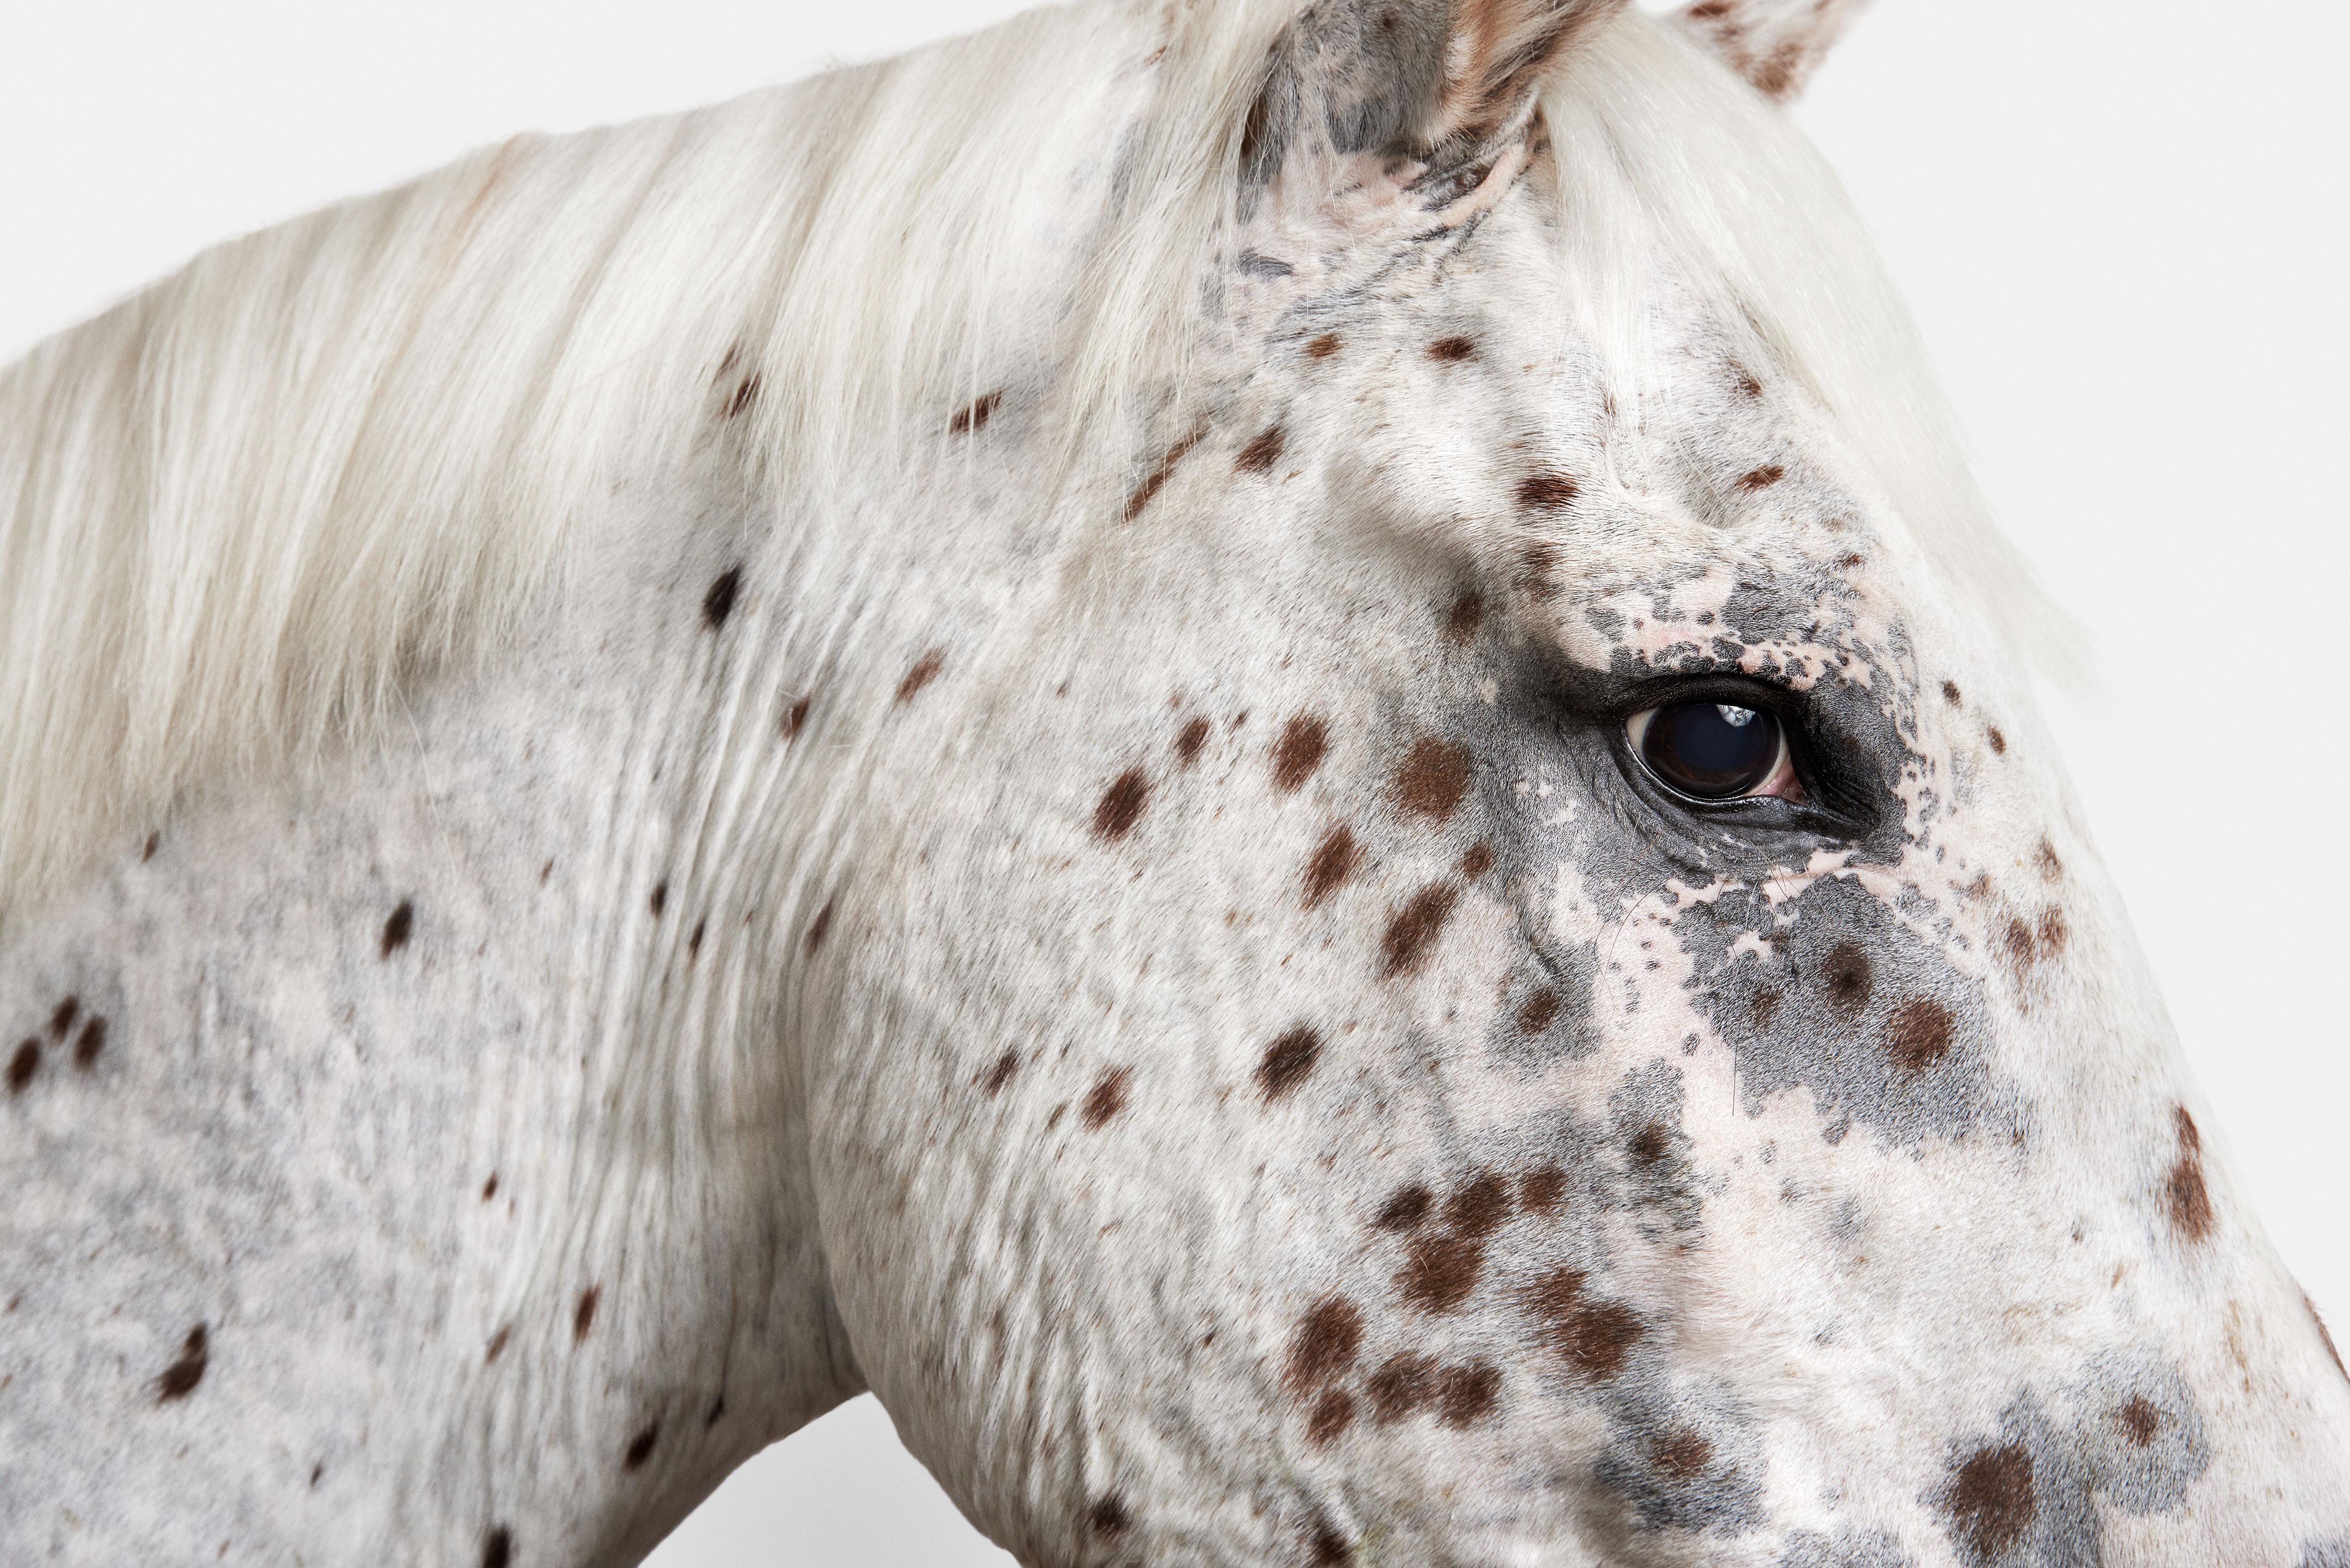 Randal Ford - Leopard Appaloosa Horse No. 1, Photography 2018, Printed After